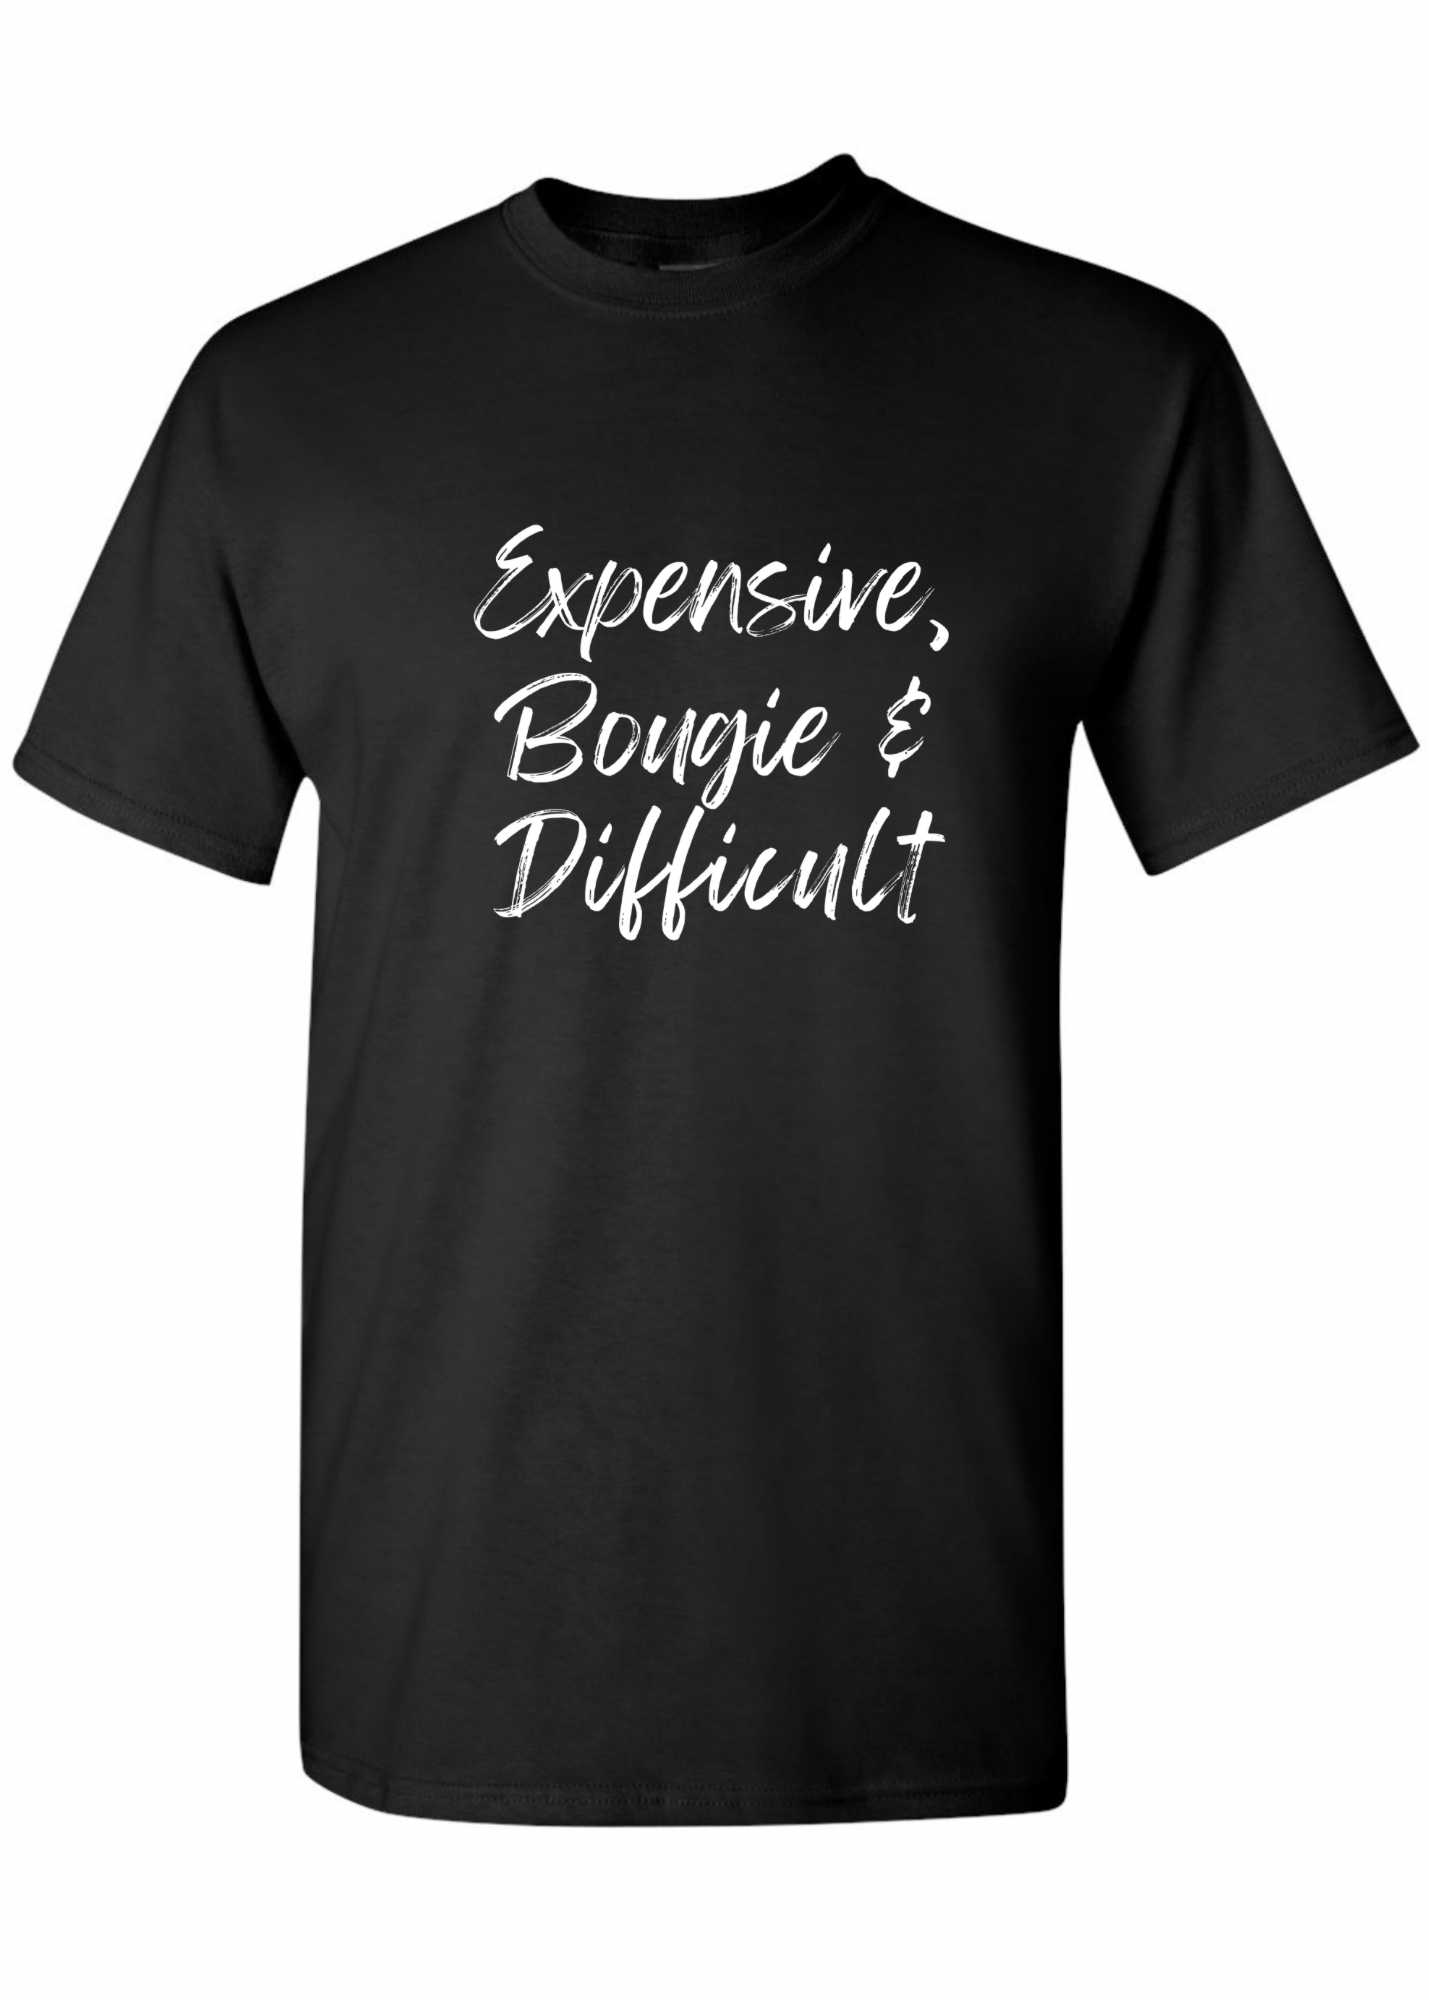 Expensive, Bougie & Difficult Tee